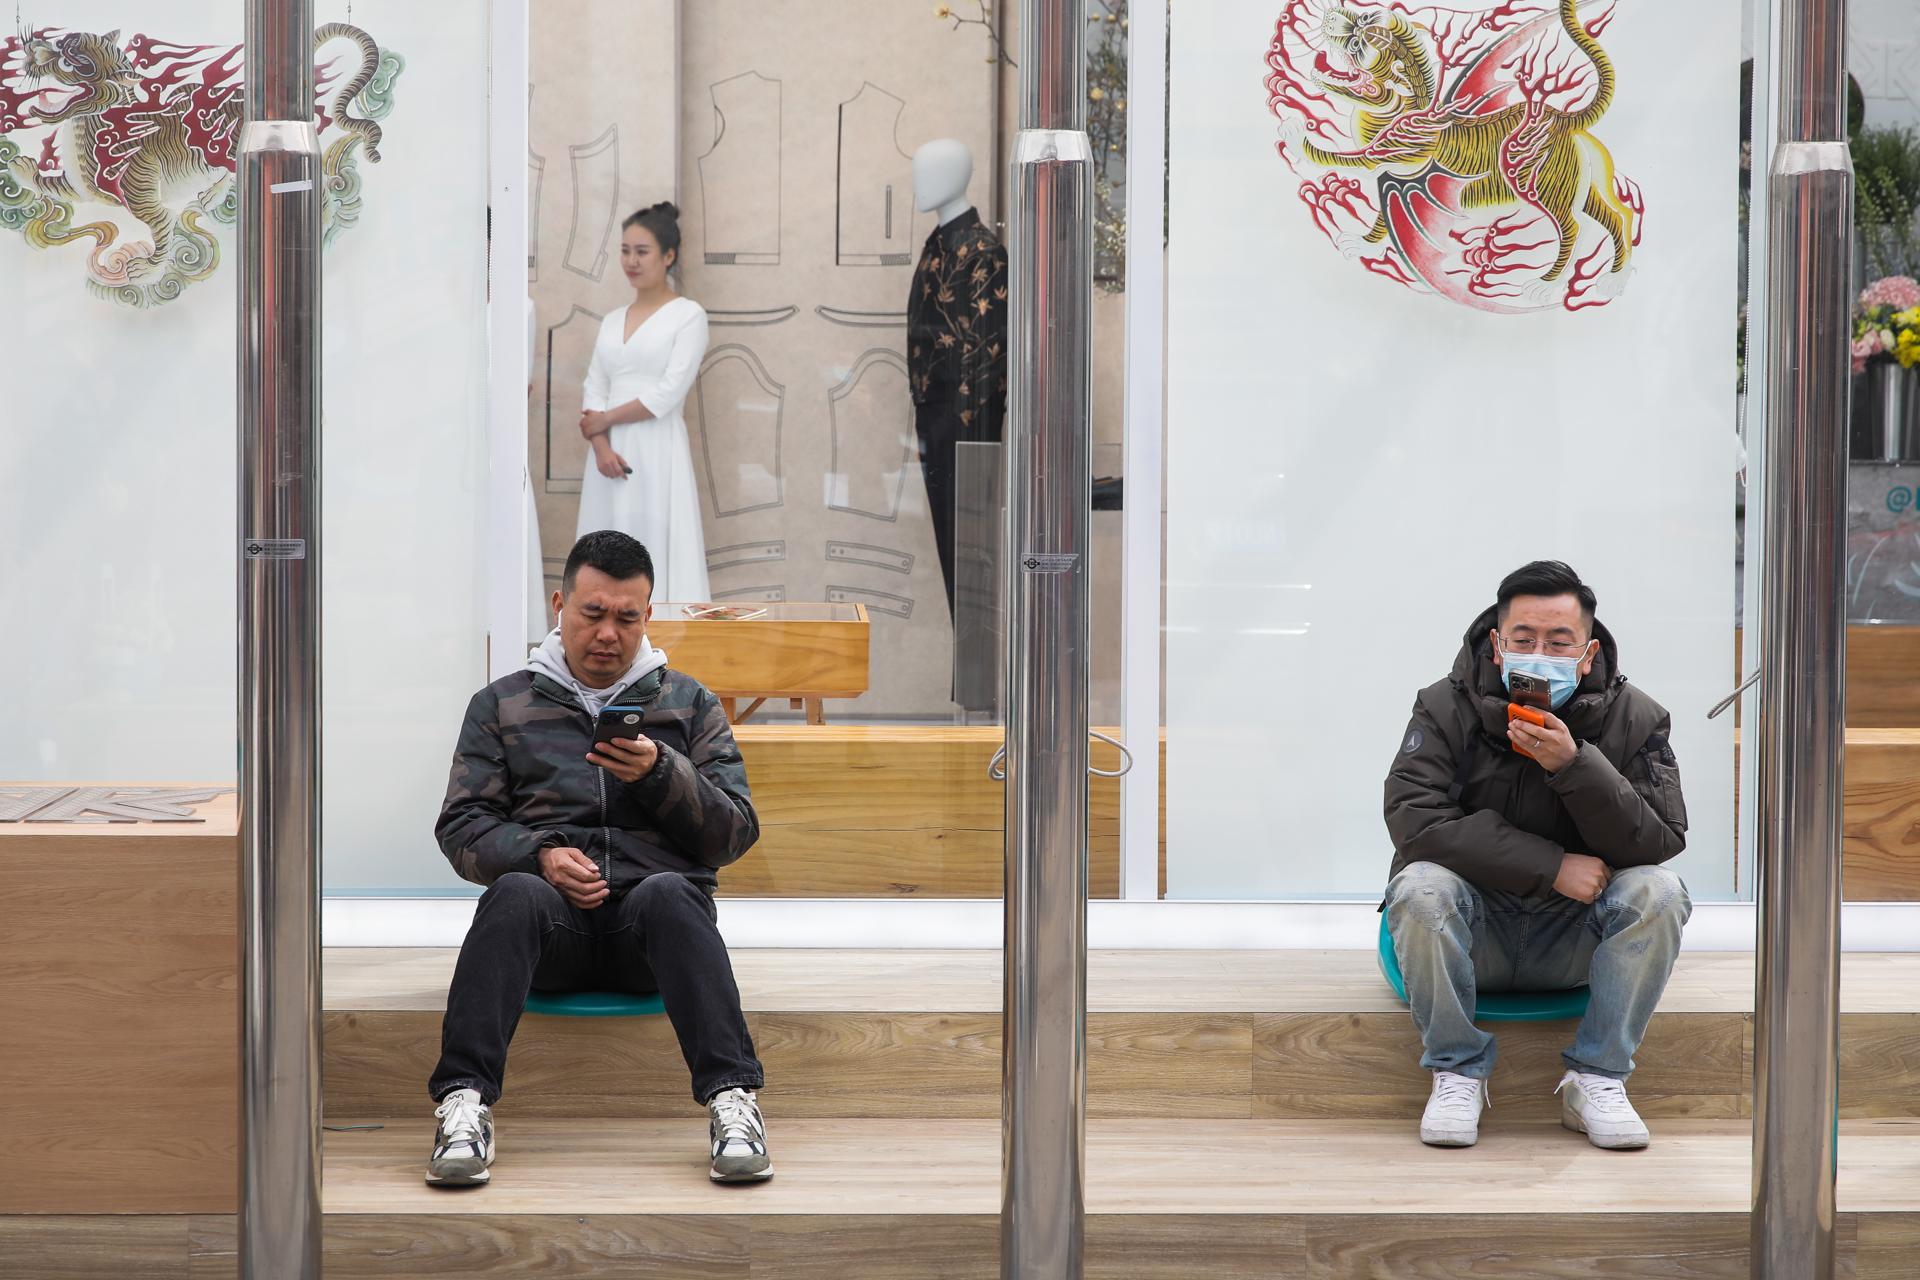 People use their cellphone on the street in Beijing, China, 24 March, 2023. EFE/EPA/WU HAO